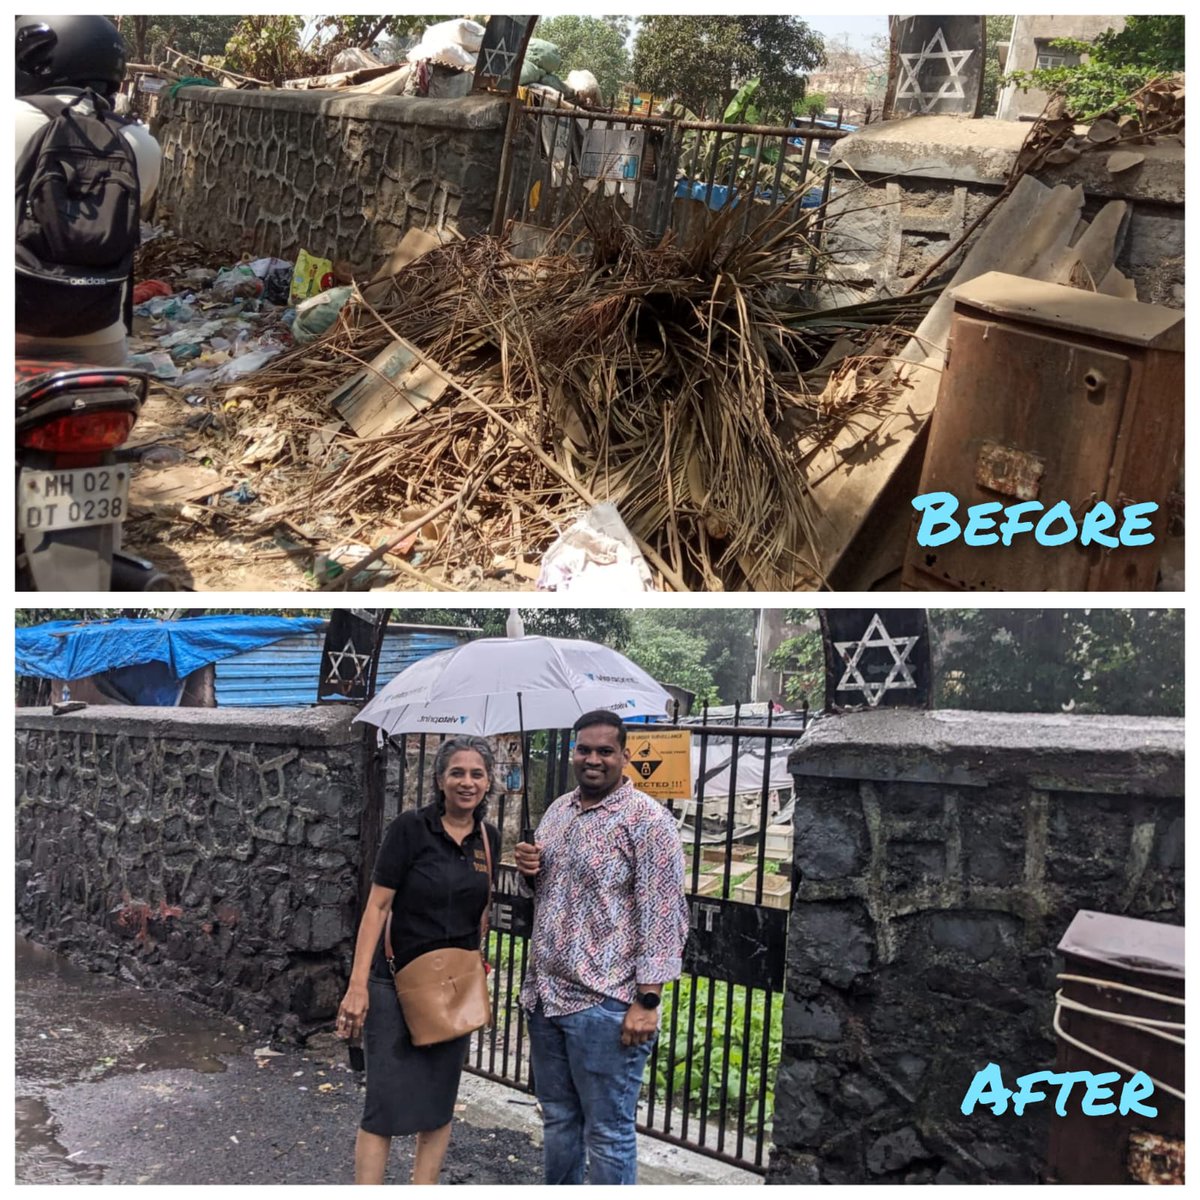 H west mumbai commendable effort to #cleanmumbai with support of @mybmc. It only needs  a  few dedicated mumbaikars like @lillianpais to bring about the change.. sure more will join in to #CleanUpMumbai @HeadMCF @MNCDFbombay